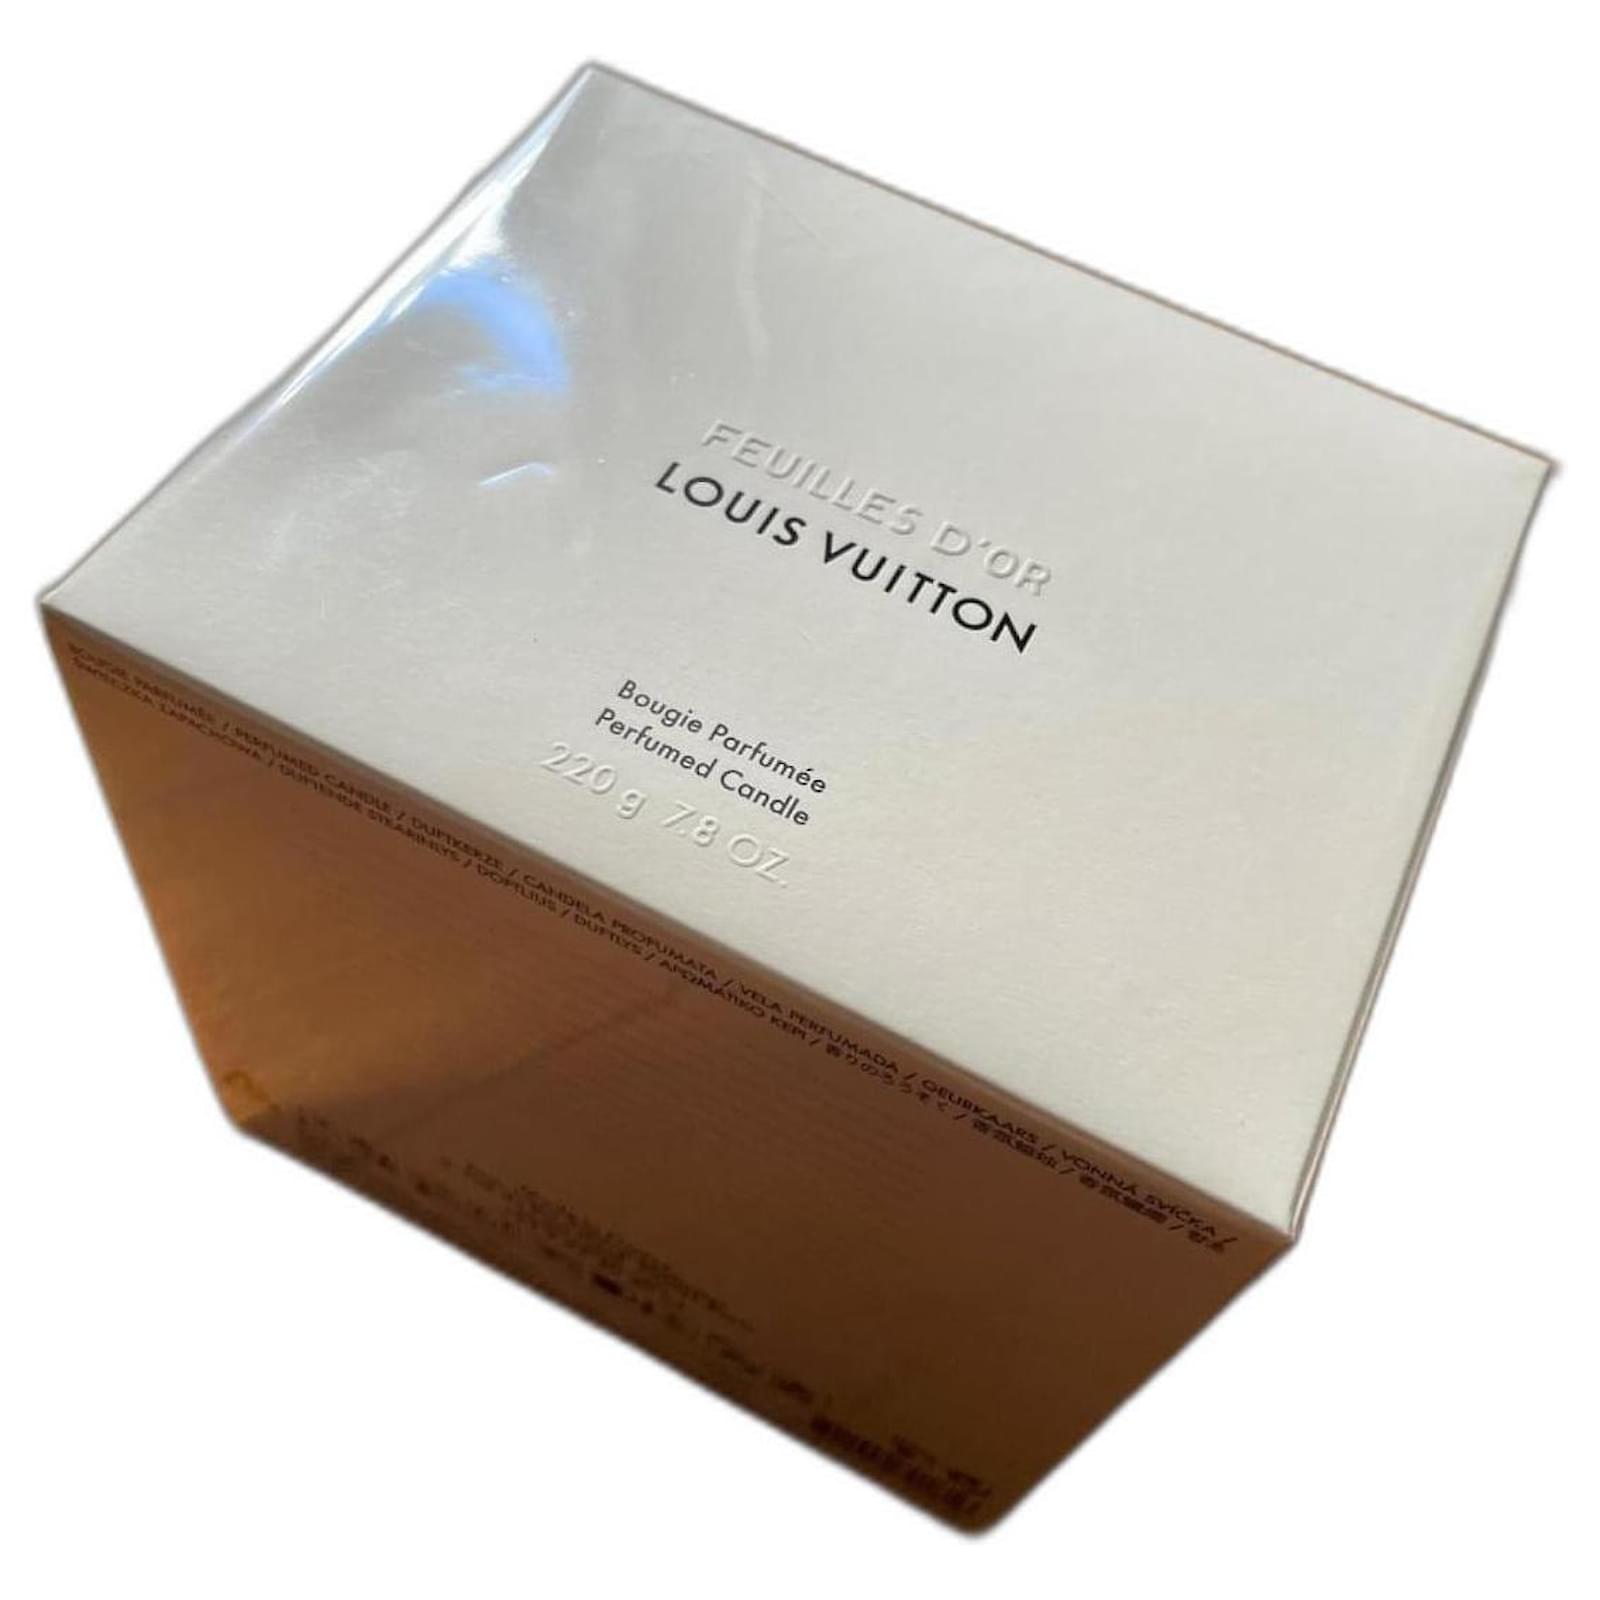 Louis Vuitton's Perfumed Candles